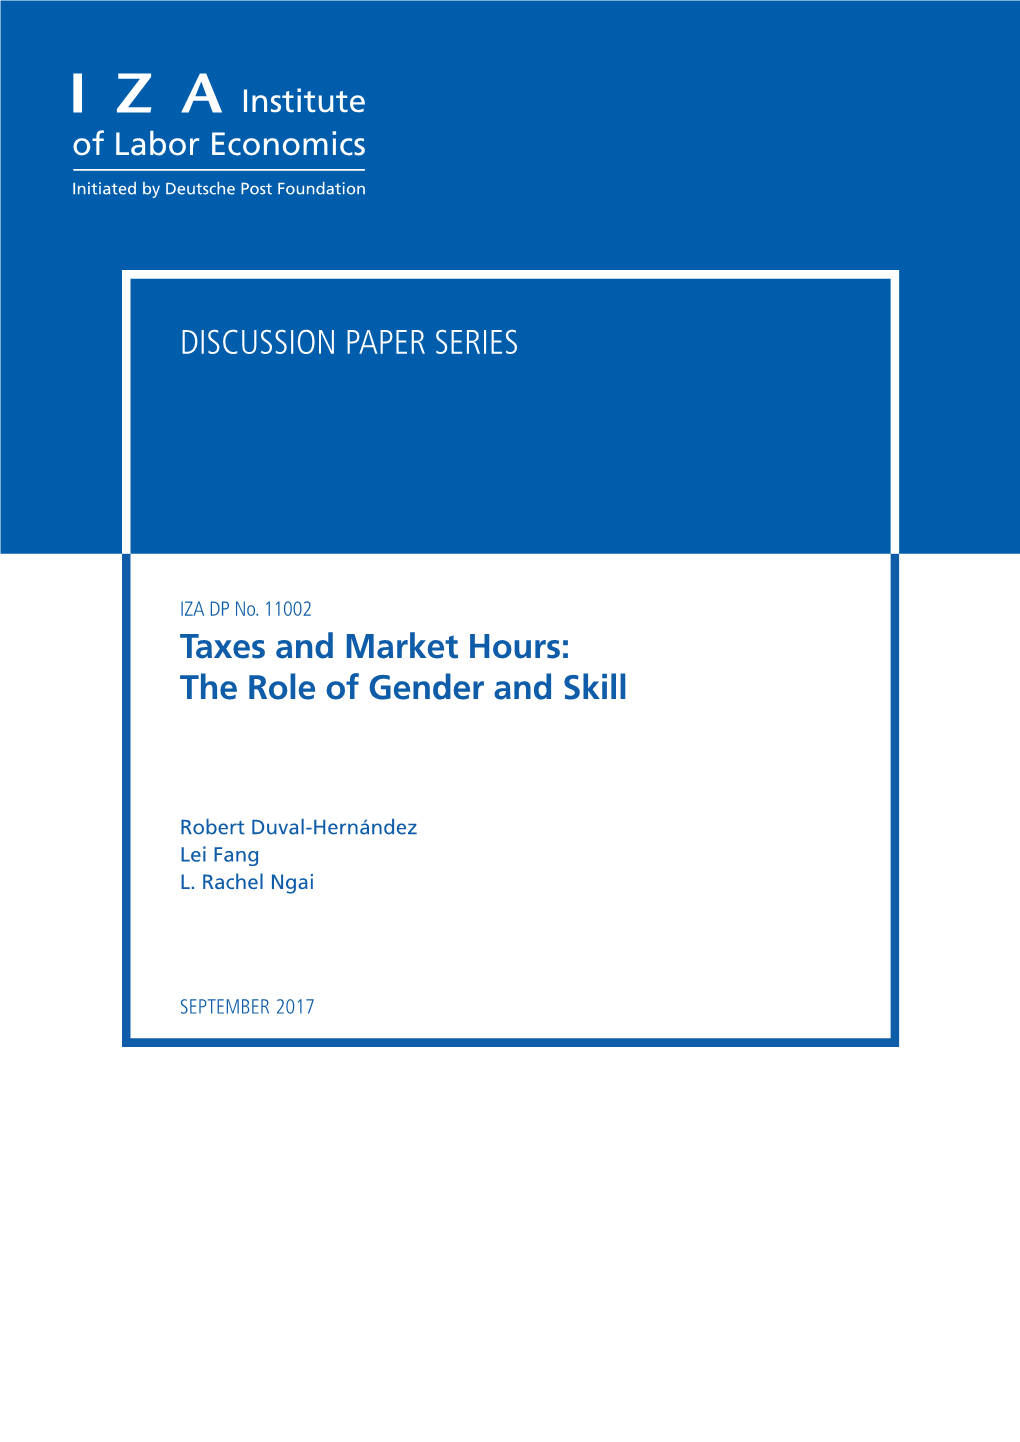 Taxes and Market Hours: the Role of Gender and Skill